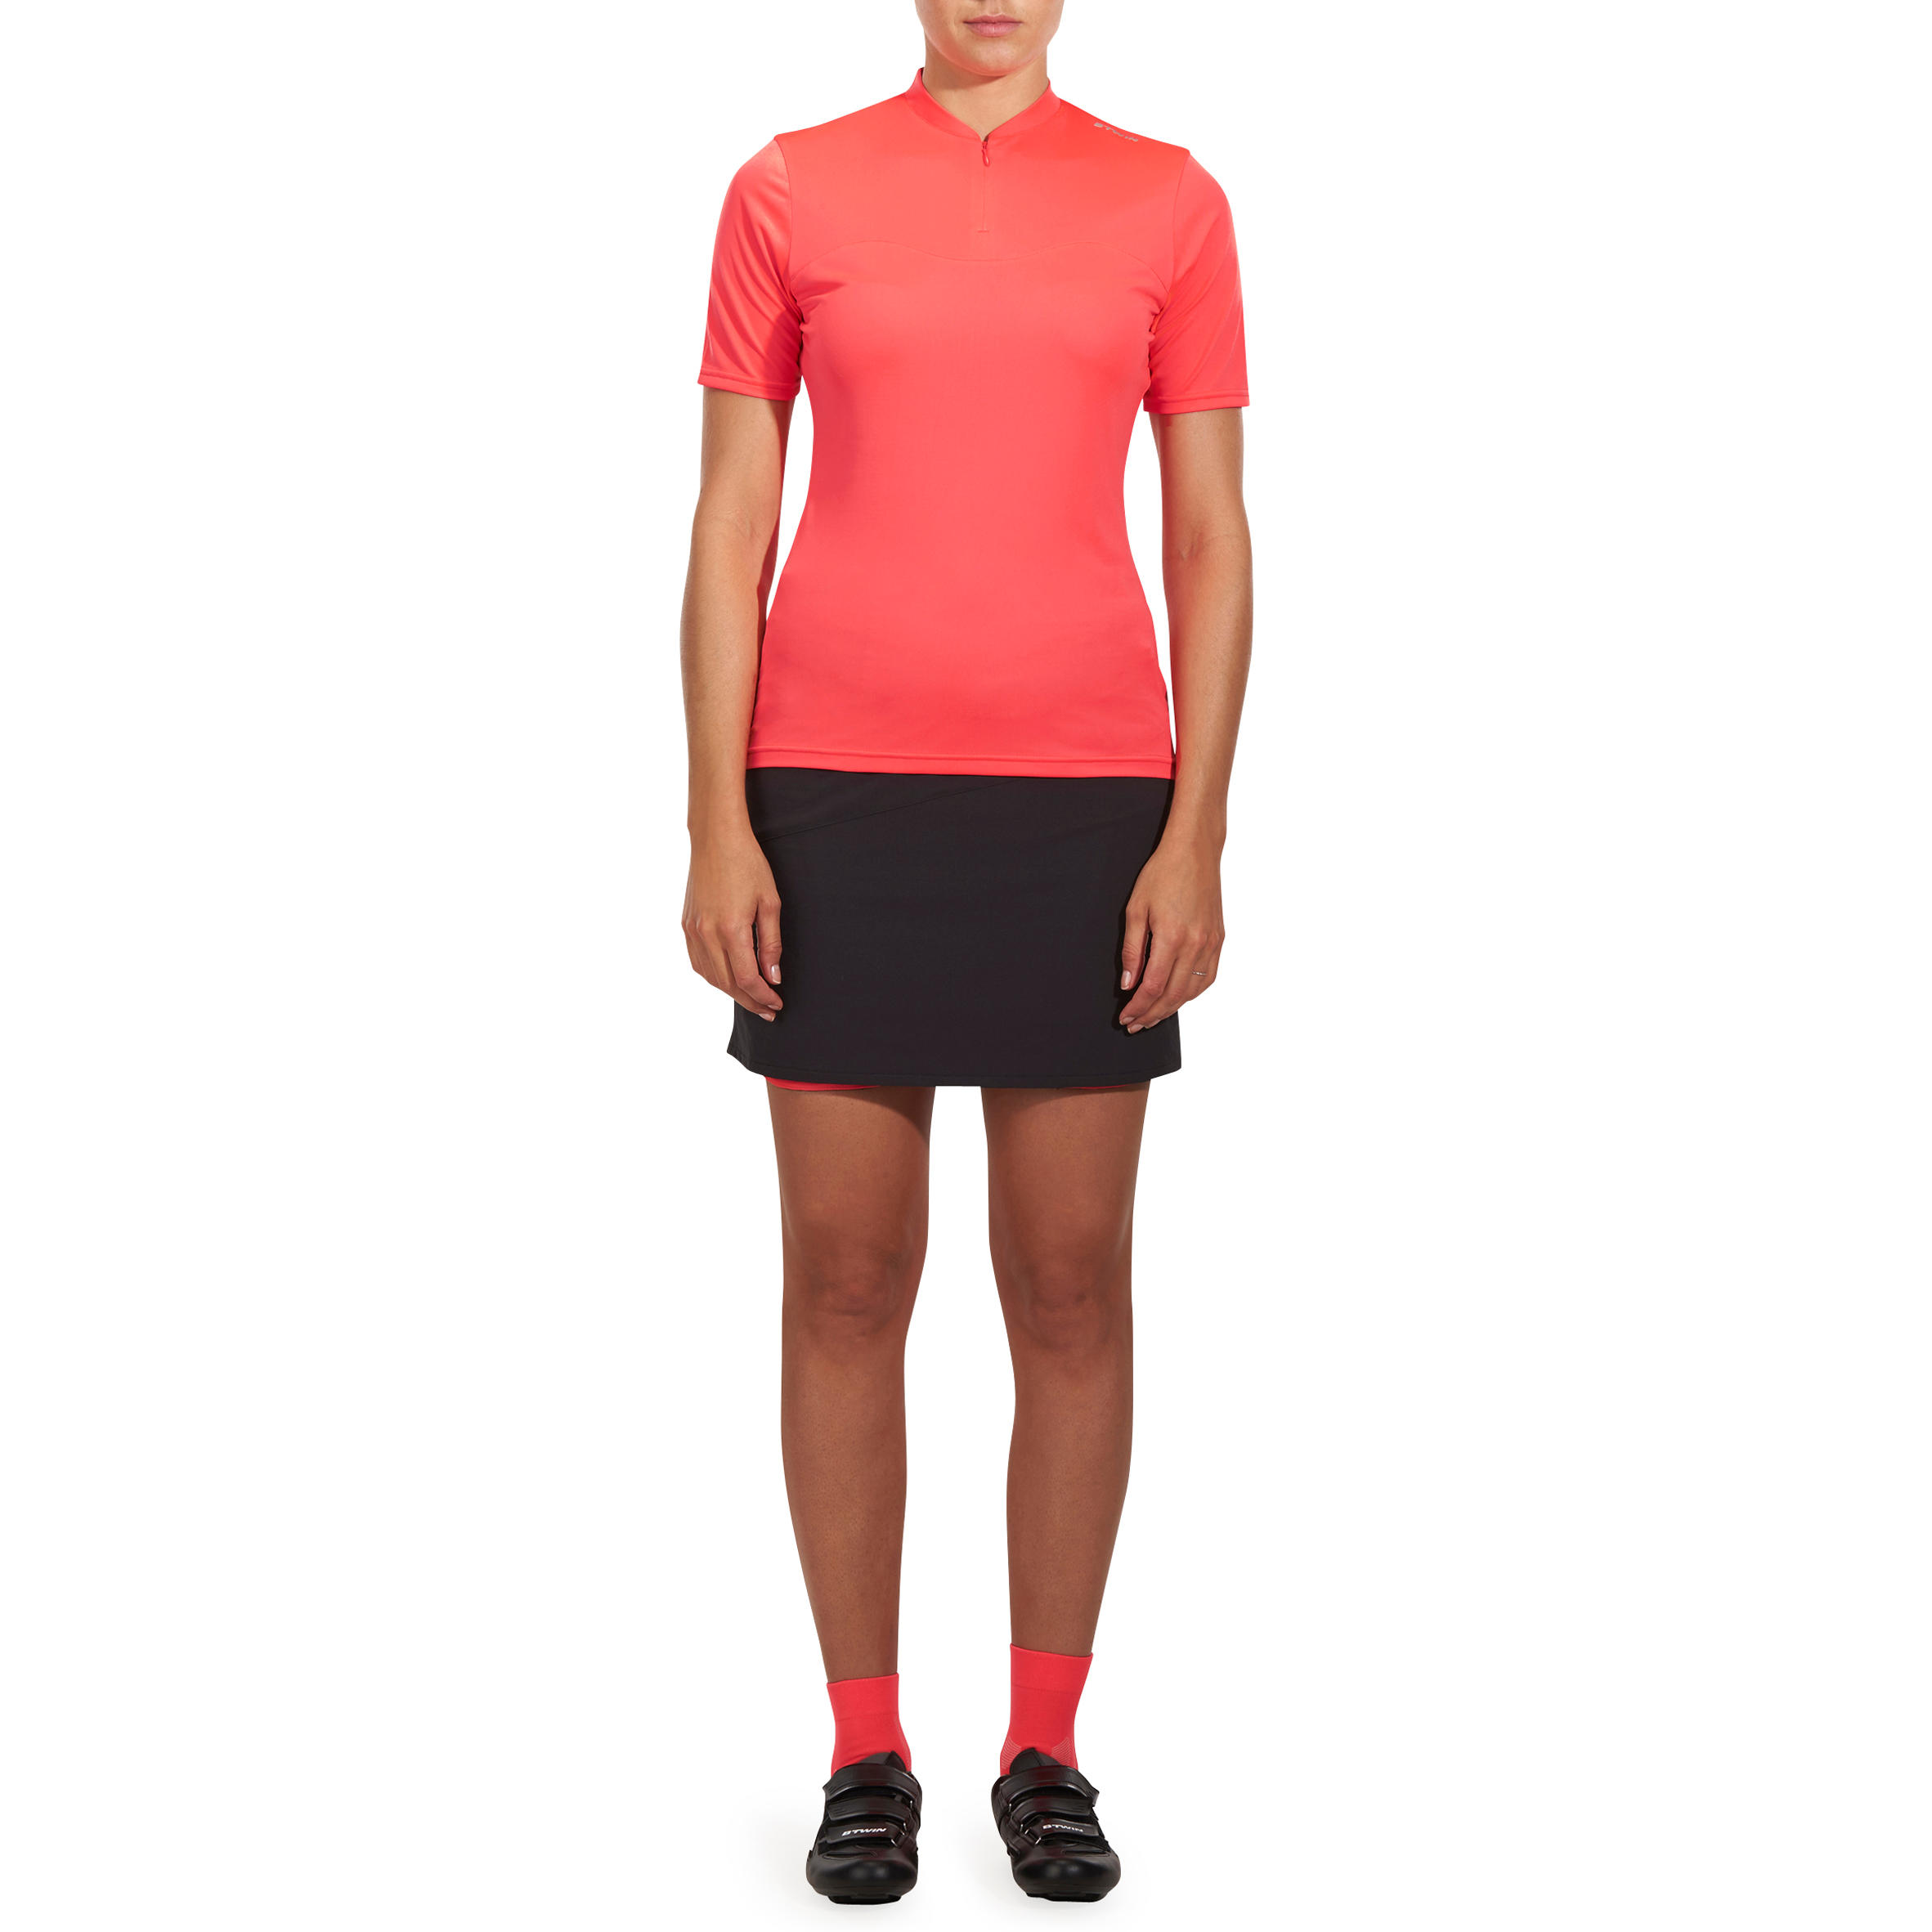 100 Women's Short-Sleeved Cycling Jersey - Pink 19/20